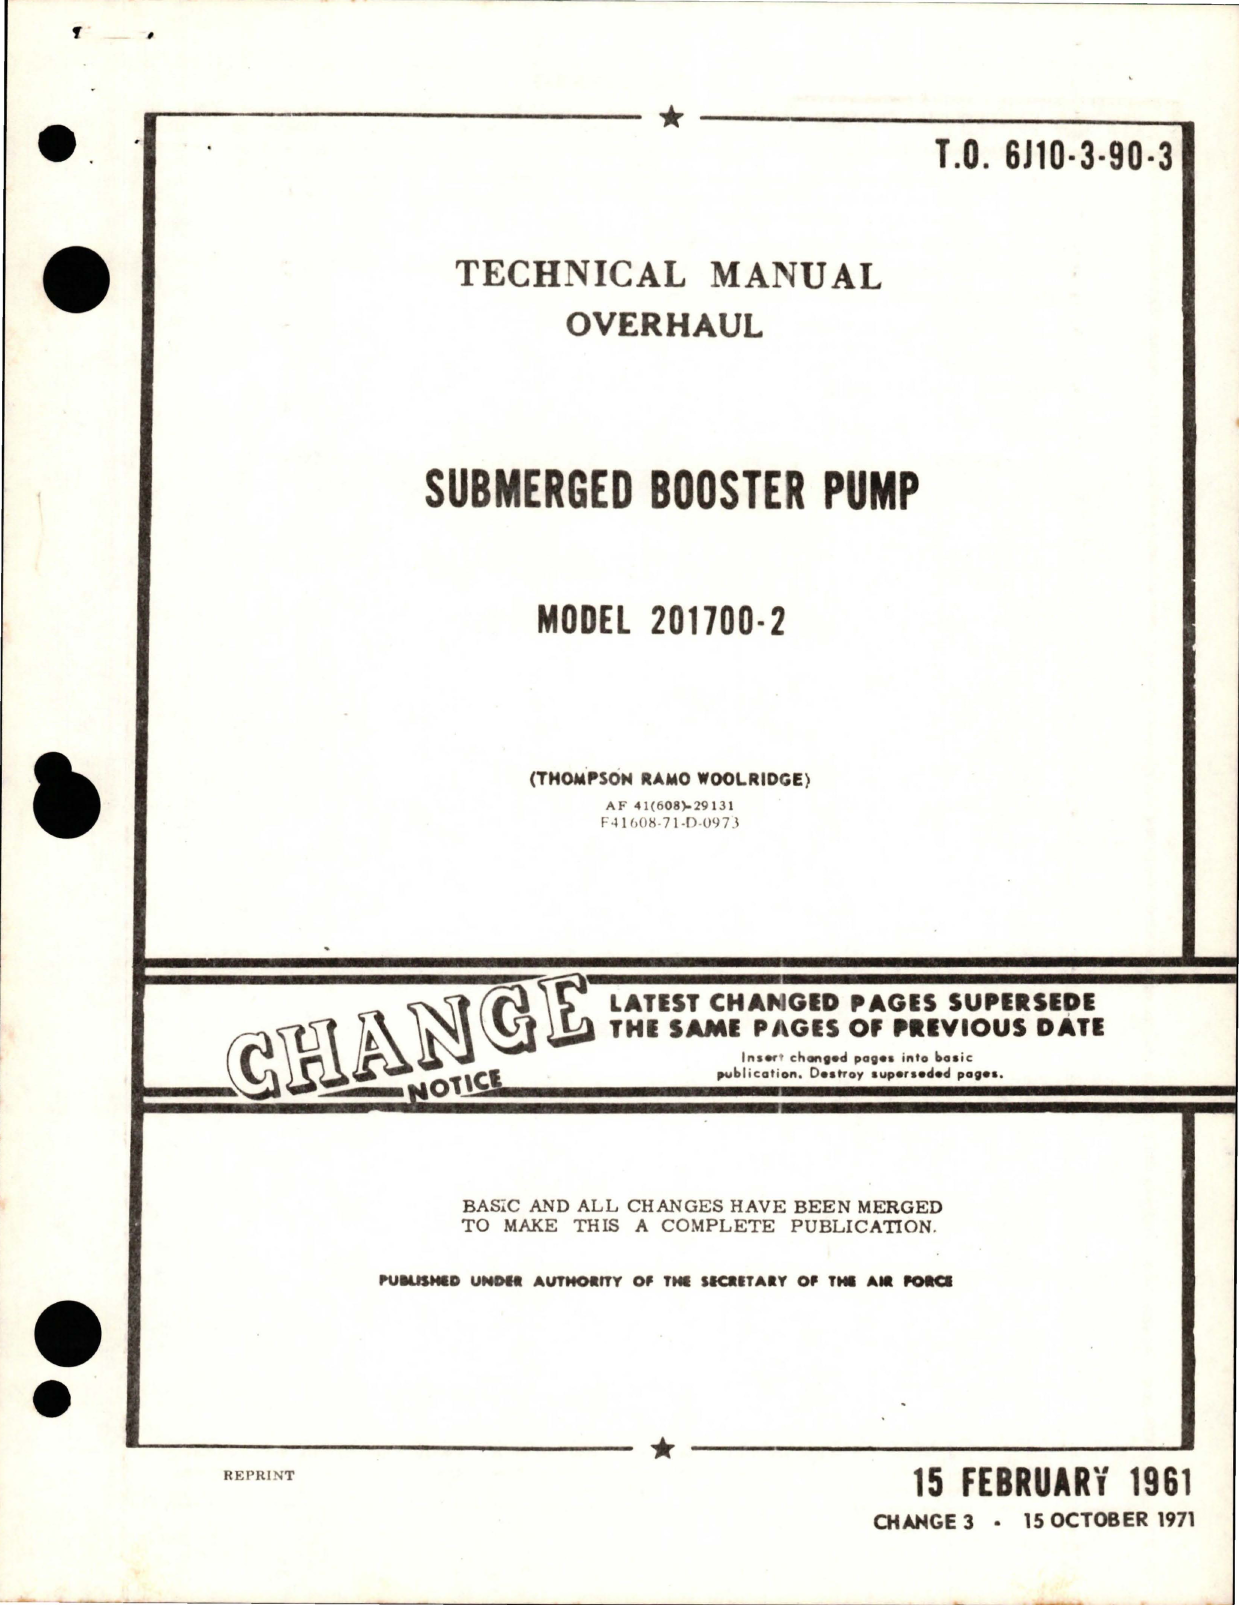 Sample page 5 from AirCorps Library document: Overhaul for Submerged Booster Pump - Model 201700-2